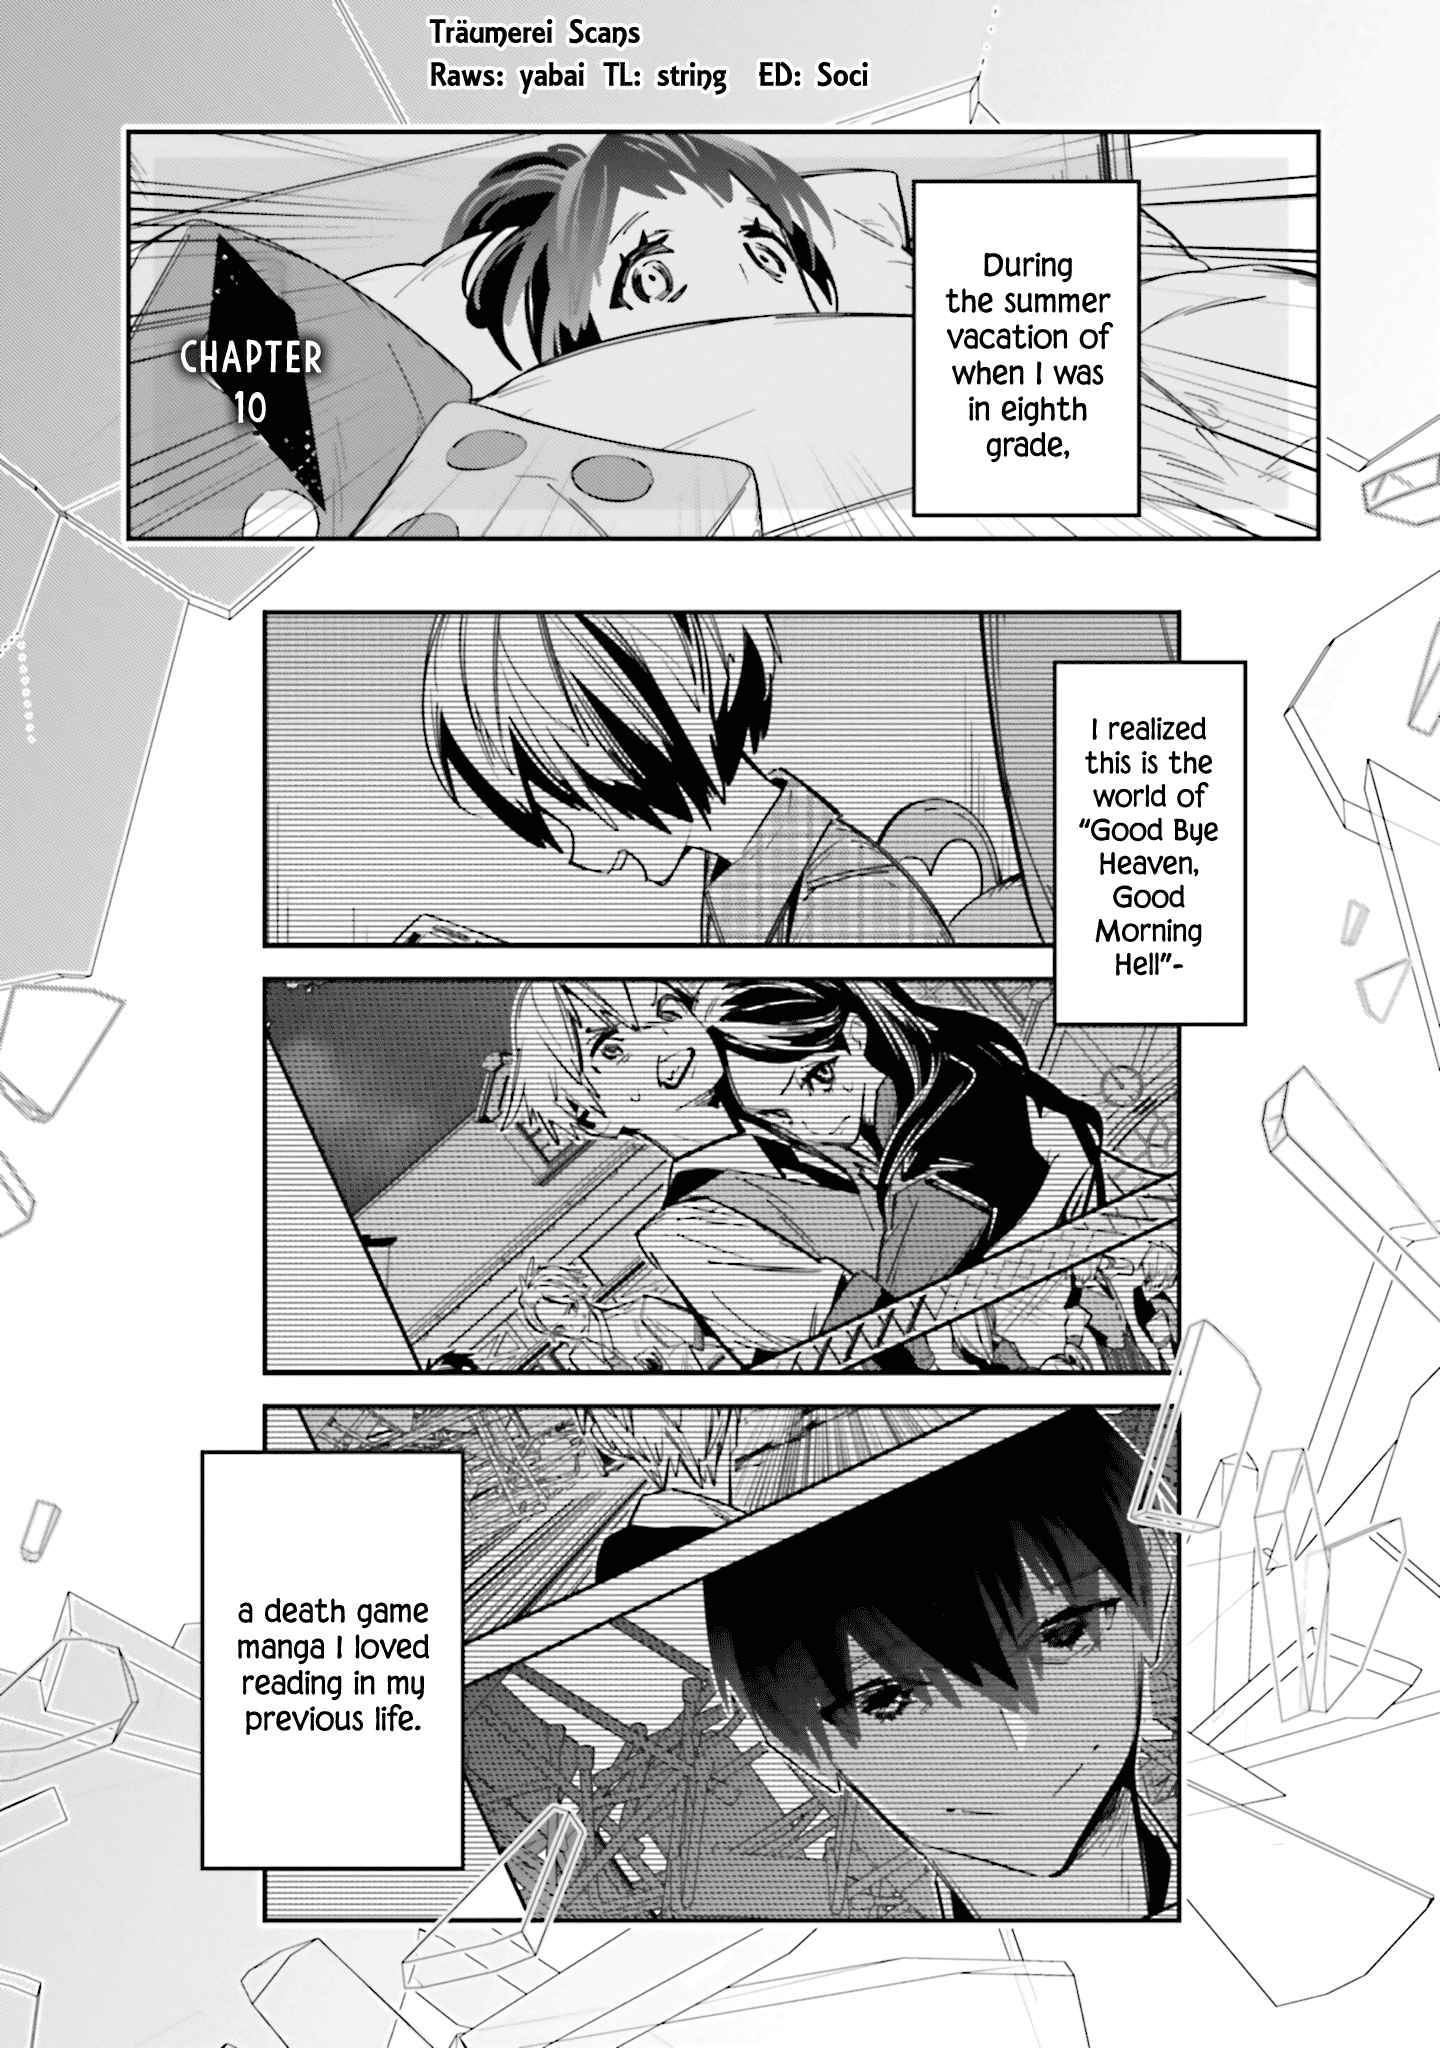 I Reincarnated As The Little Sister Of A Death Game Manga’S Murd3R Mastermind And Failed - chapter 10 - #5